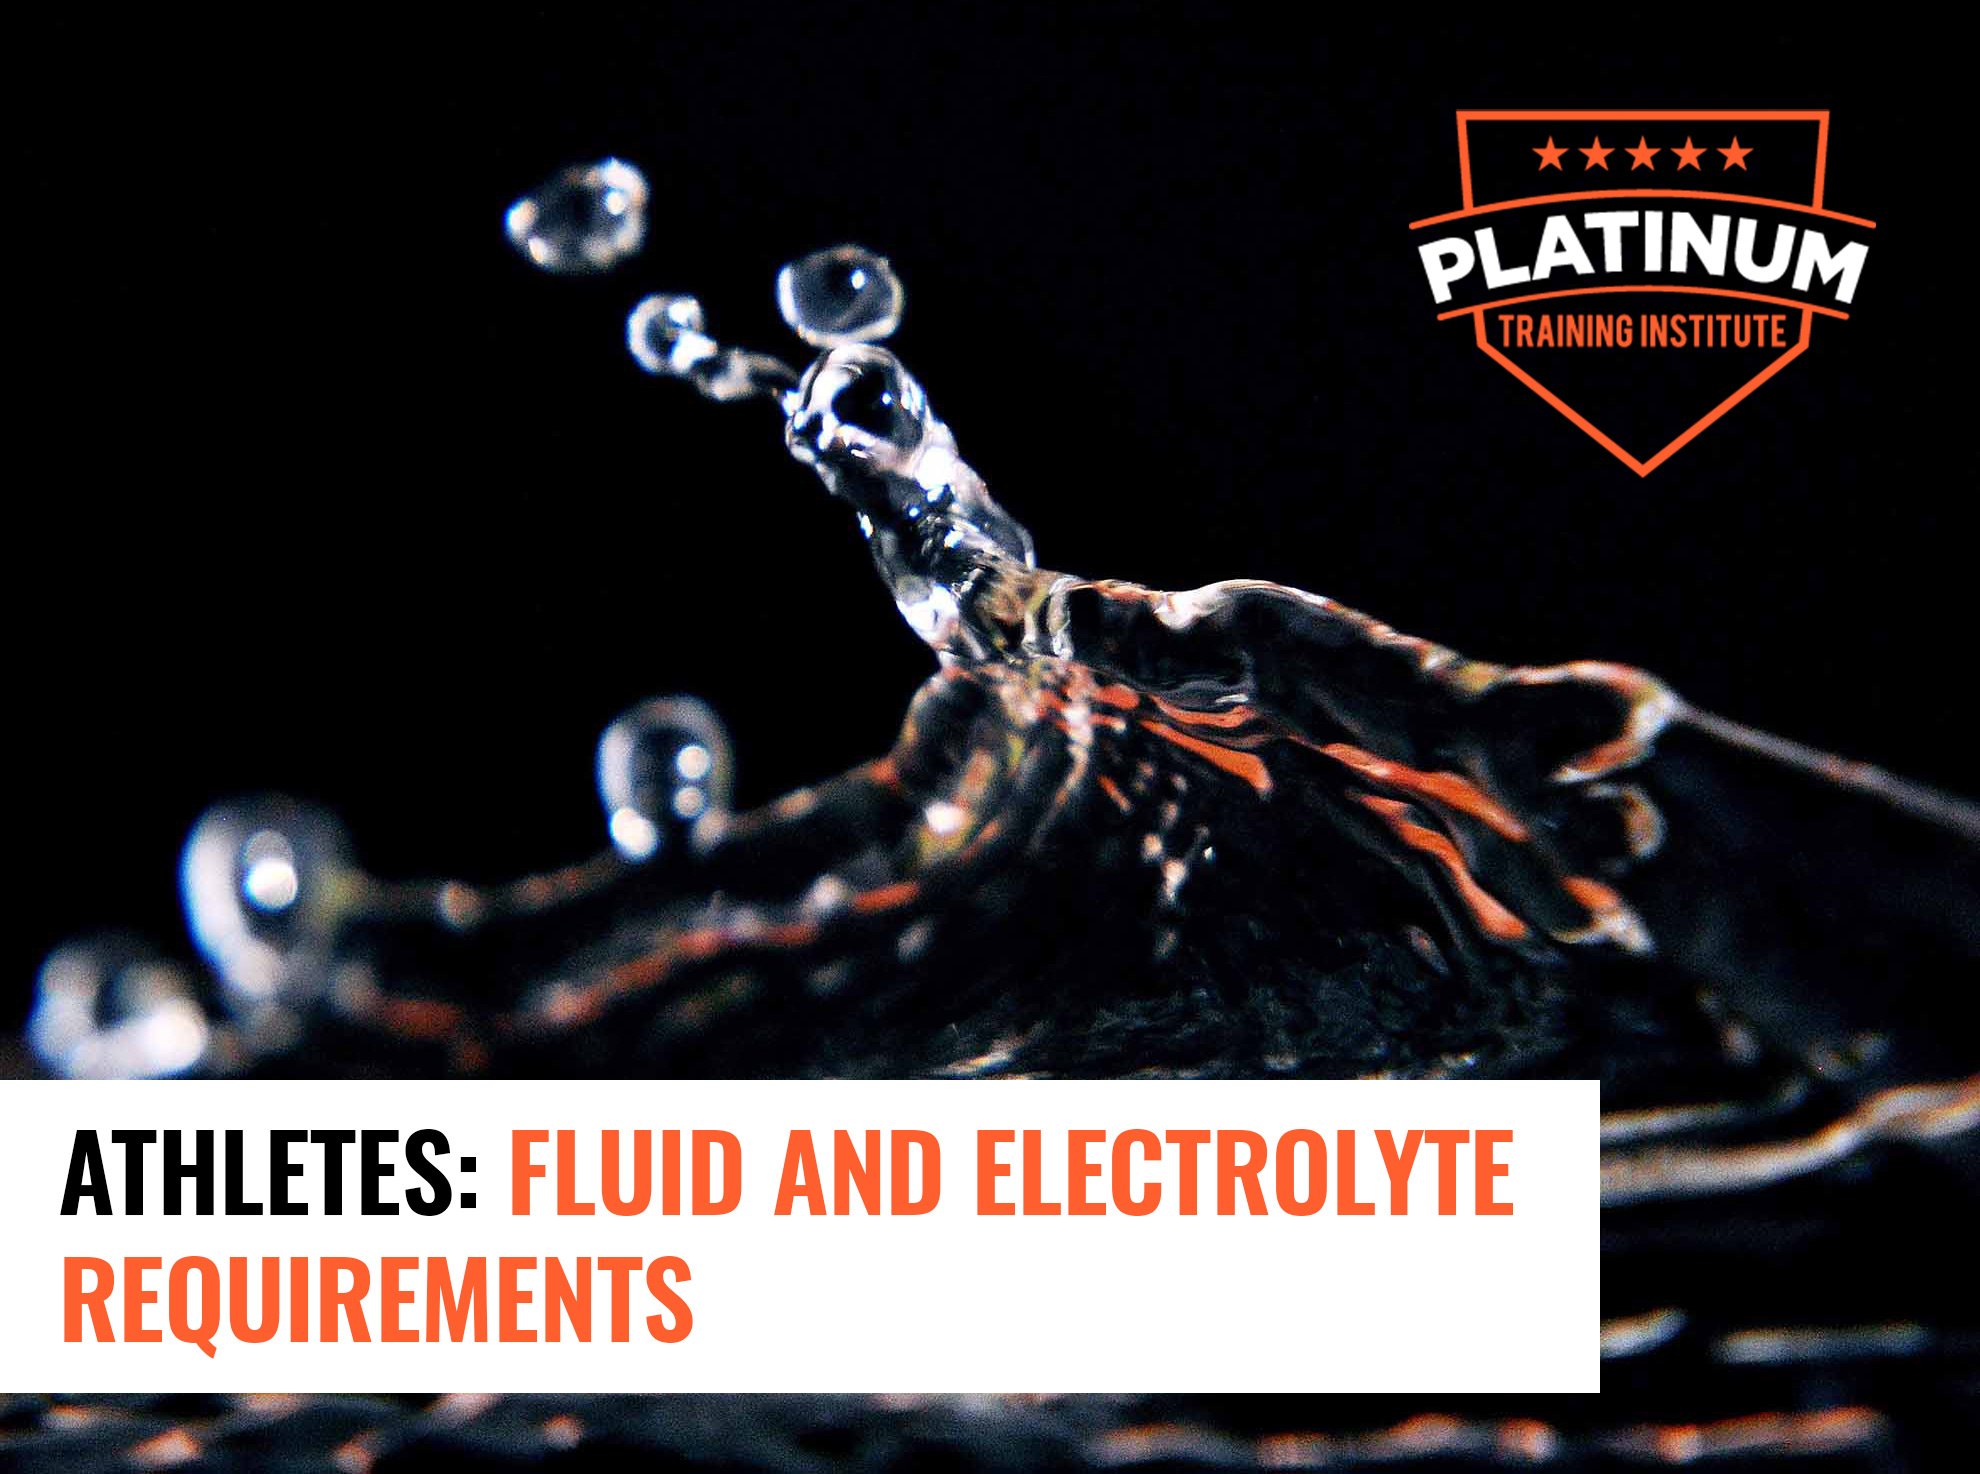 Athletes: Fluid and Electrolyte Requirements